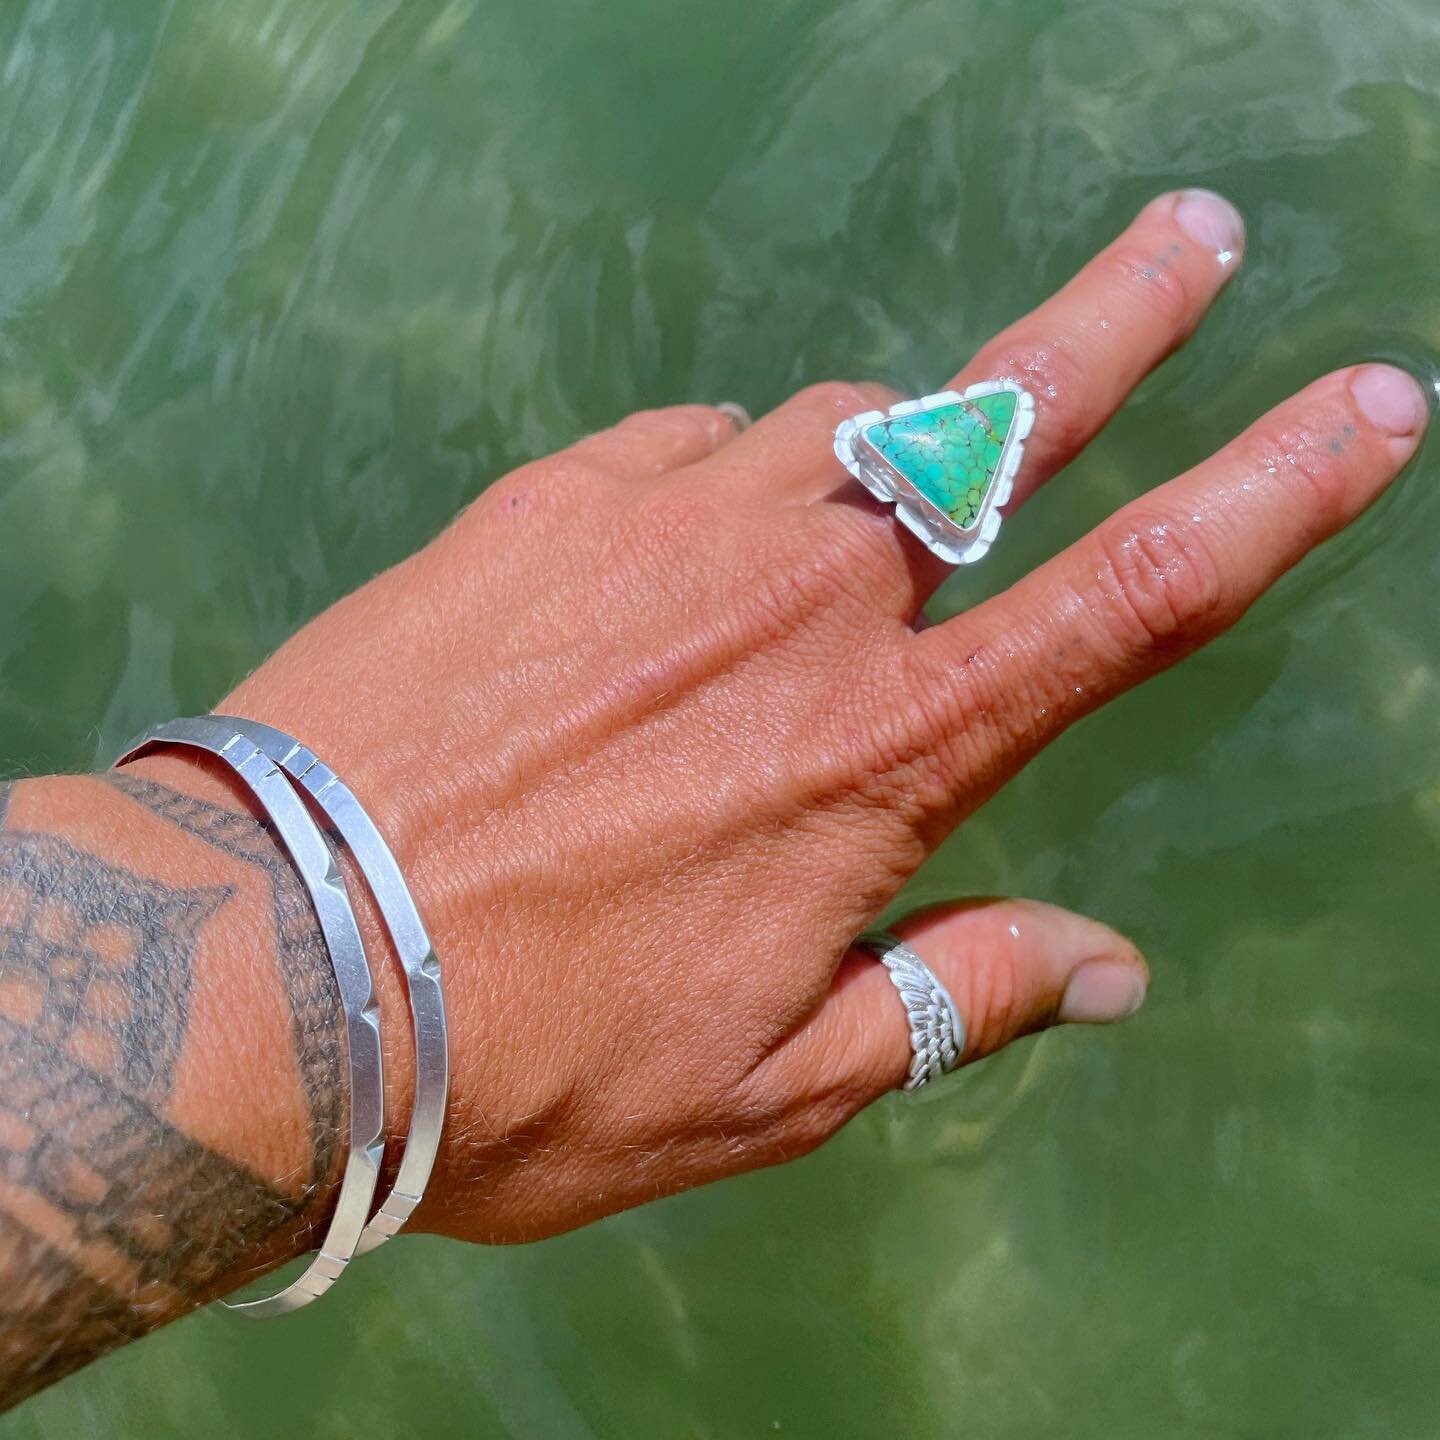 Mountain water, Valley Cuffs. 

Just added these to the site. They&rsquo;re gonna go good with that summer glow.